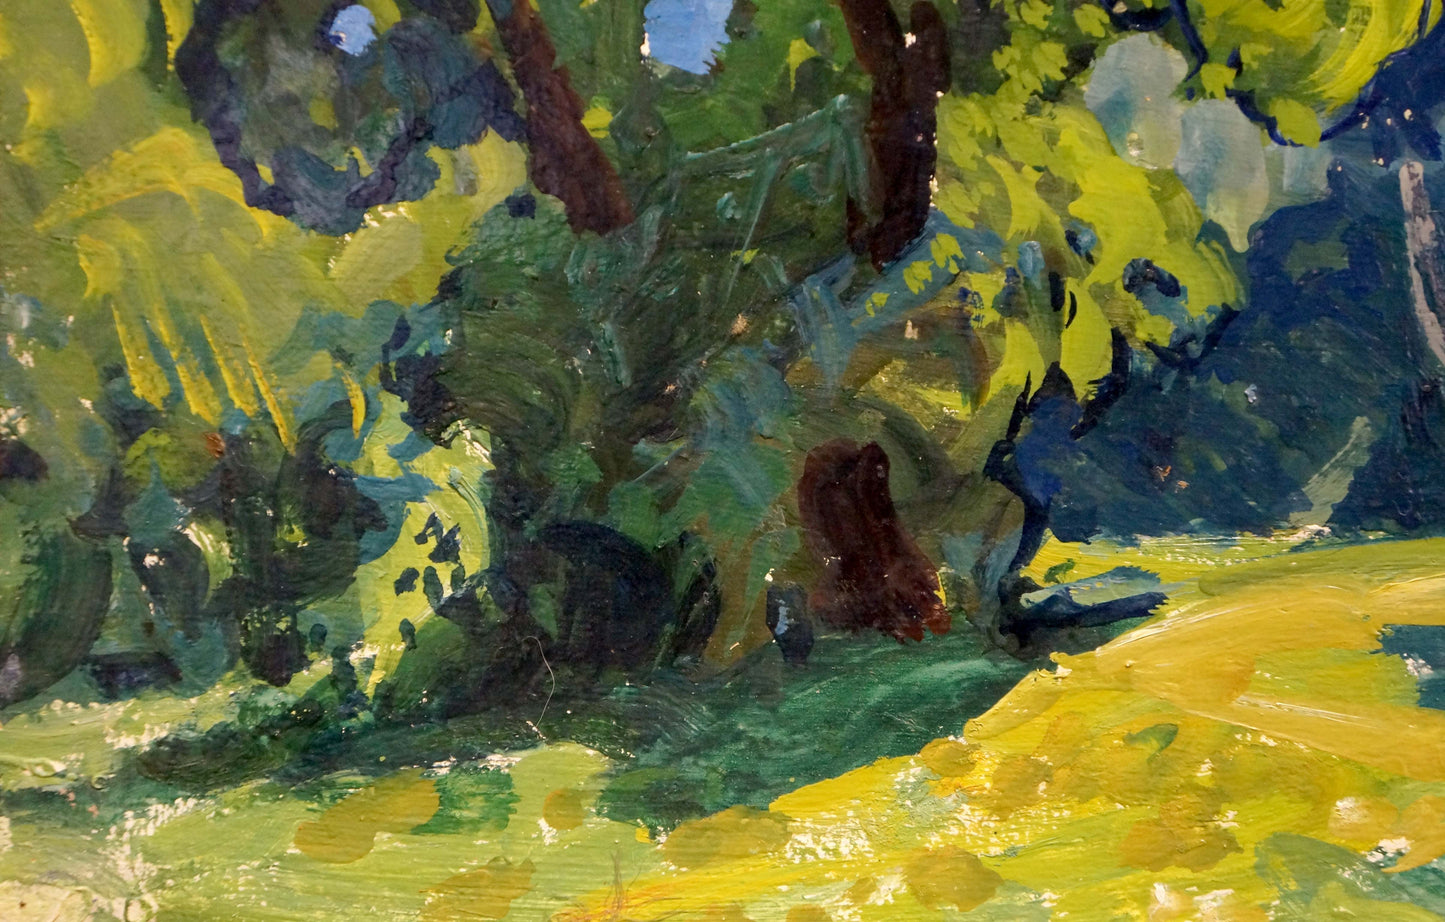 Dense Forest: an oil painting by Georgy Sergeevich Kolosovsky